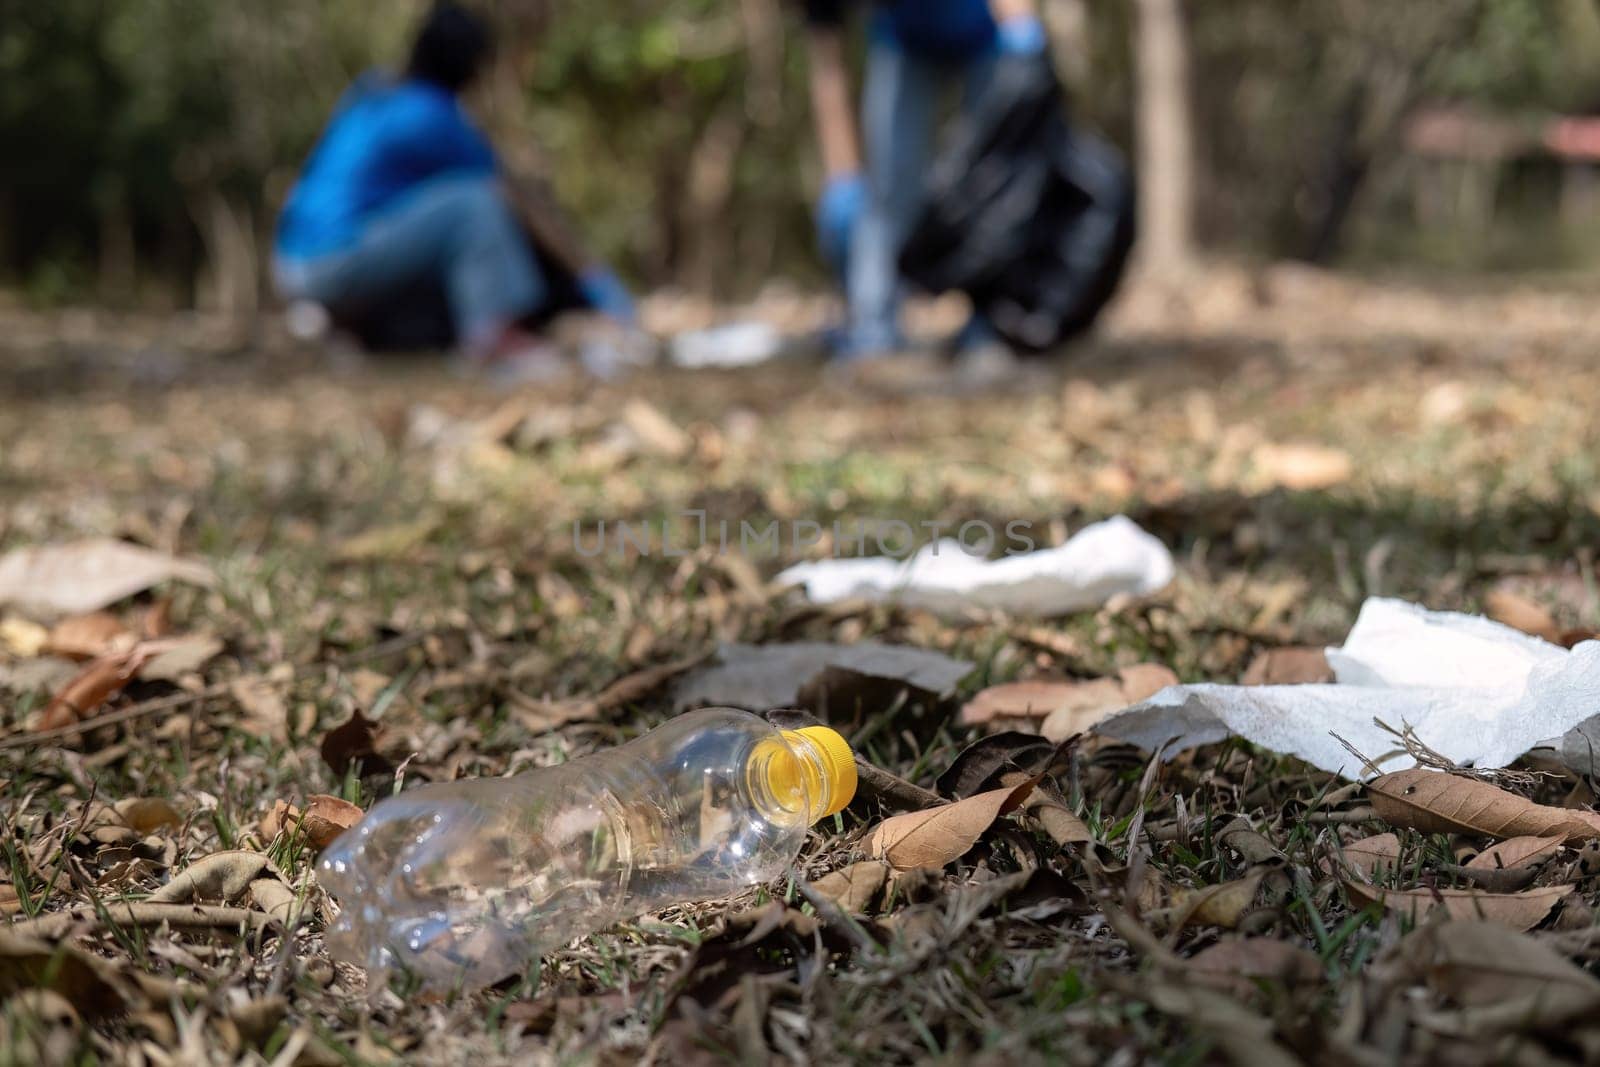 close up view, A group of Asian volunteers collects trash in plastic bags and cleaning areas in the forest to preserve the natural ecosystem..